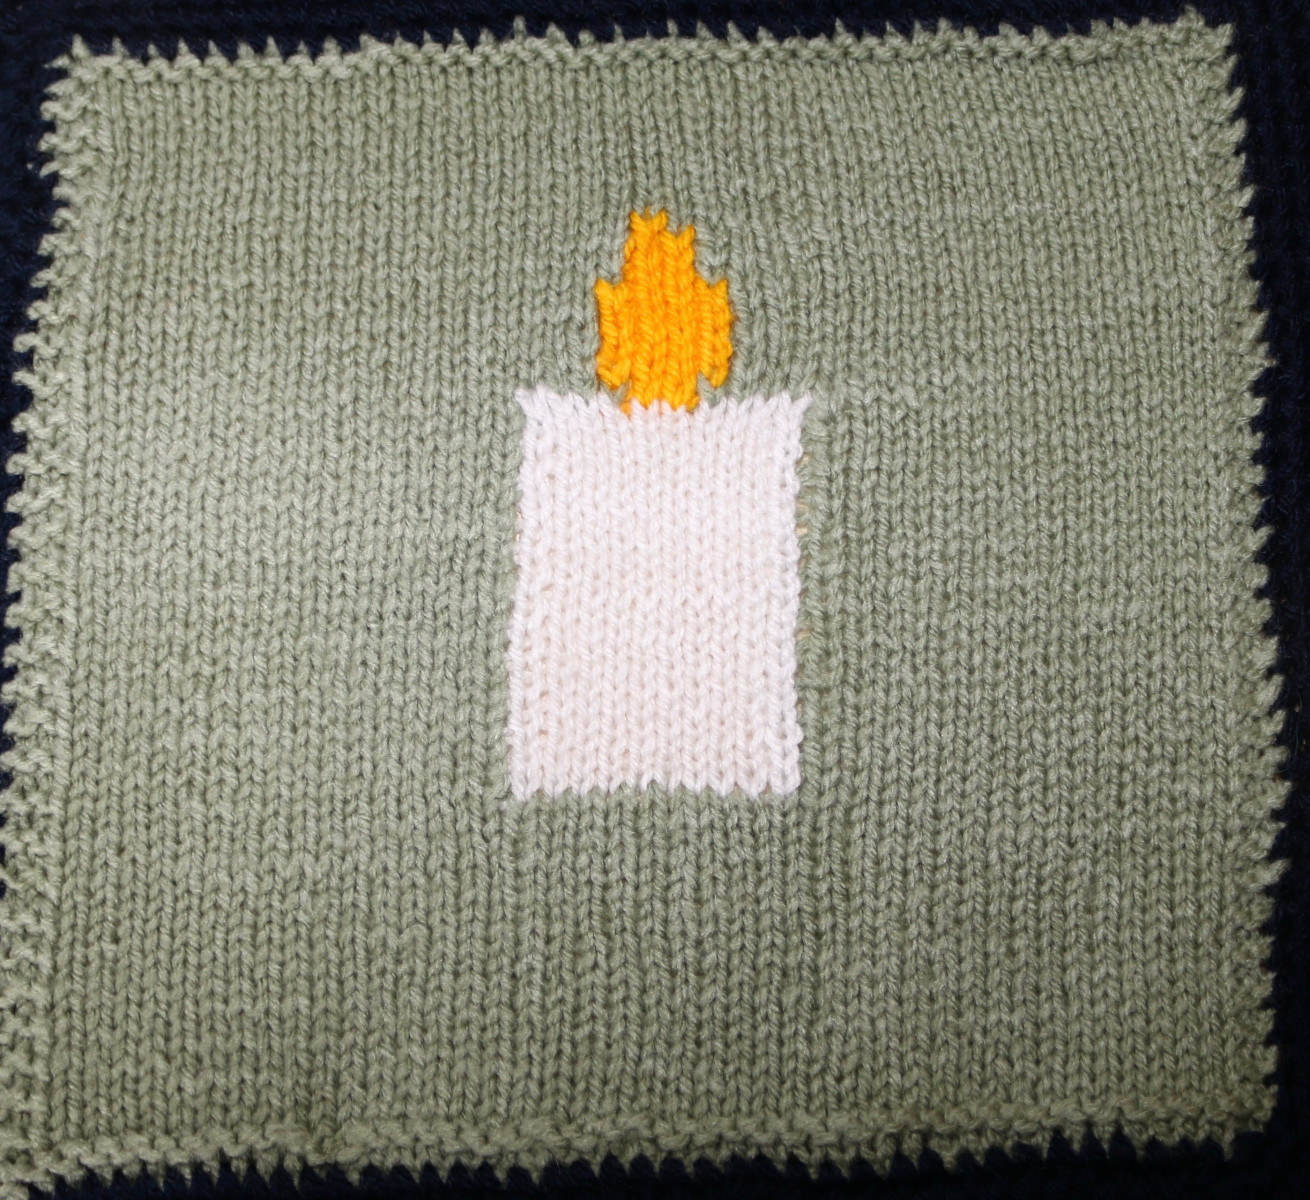 Knitted square of a Lit candle